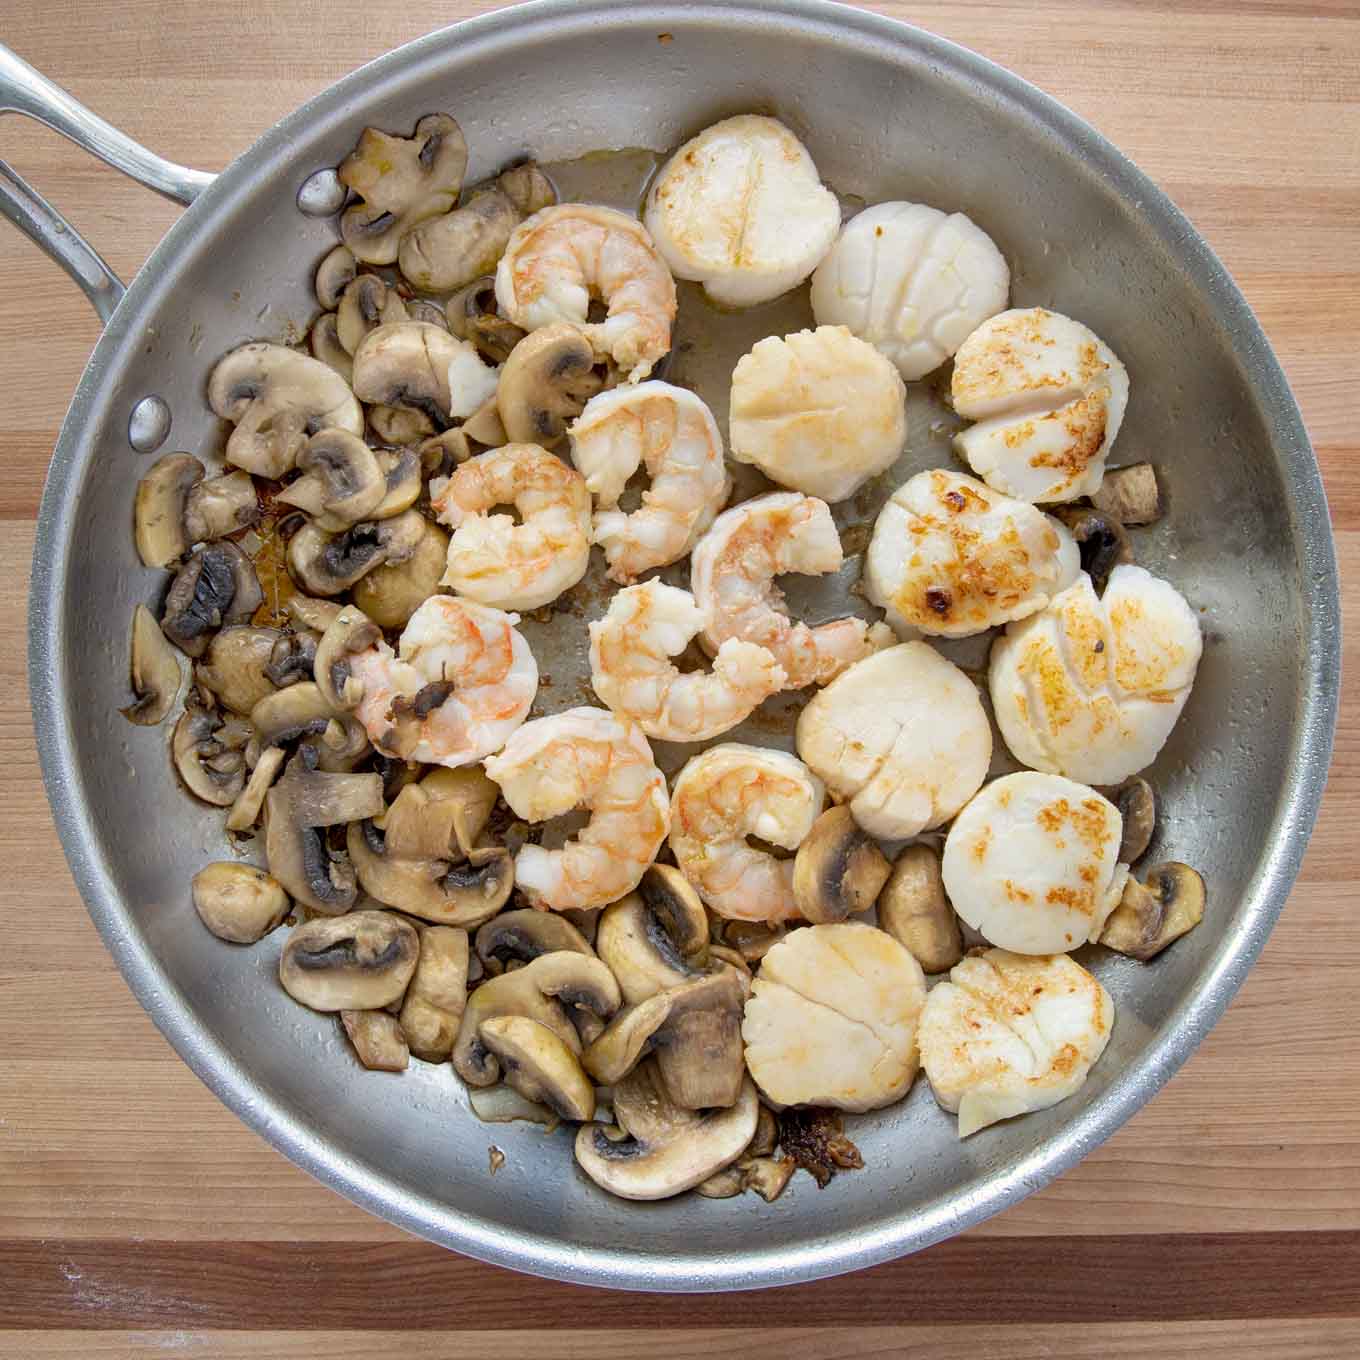 ingredients to make seafood riviera including scallops, shrimp and mushrooms in a large saute pan